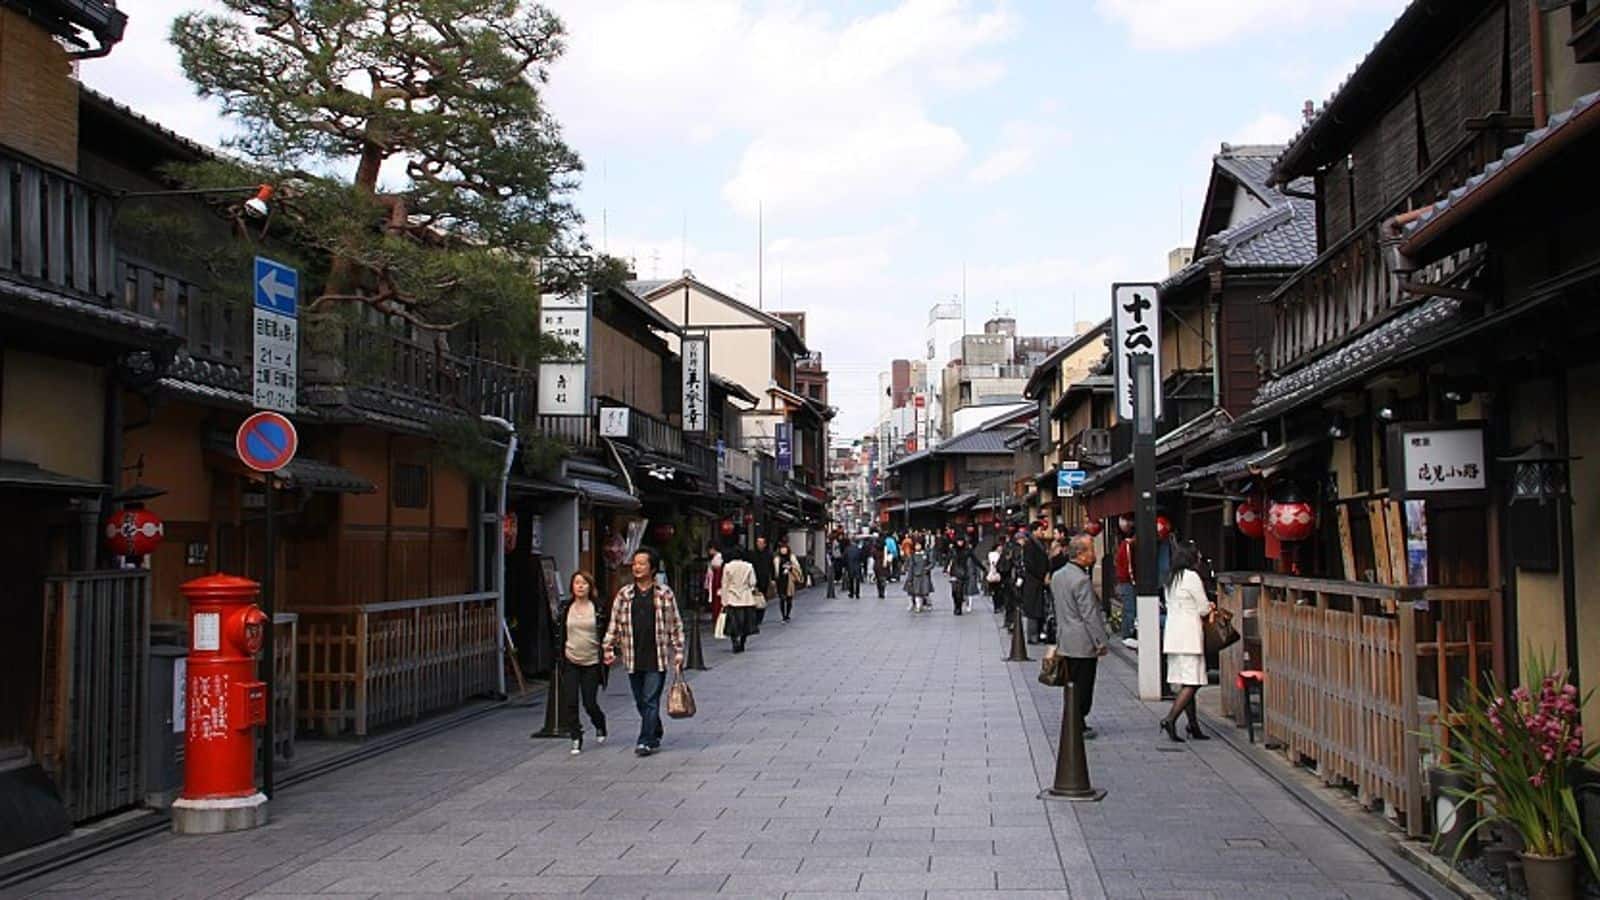 Traveling solo to Kyoto? Add these activities to your itinerary